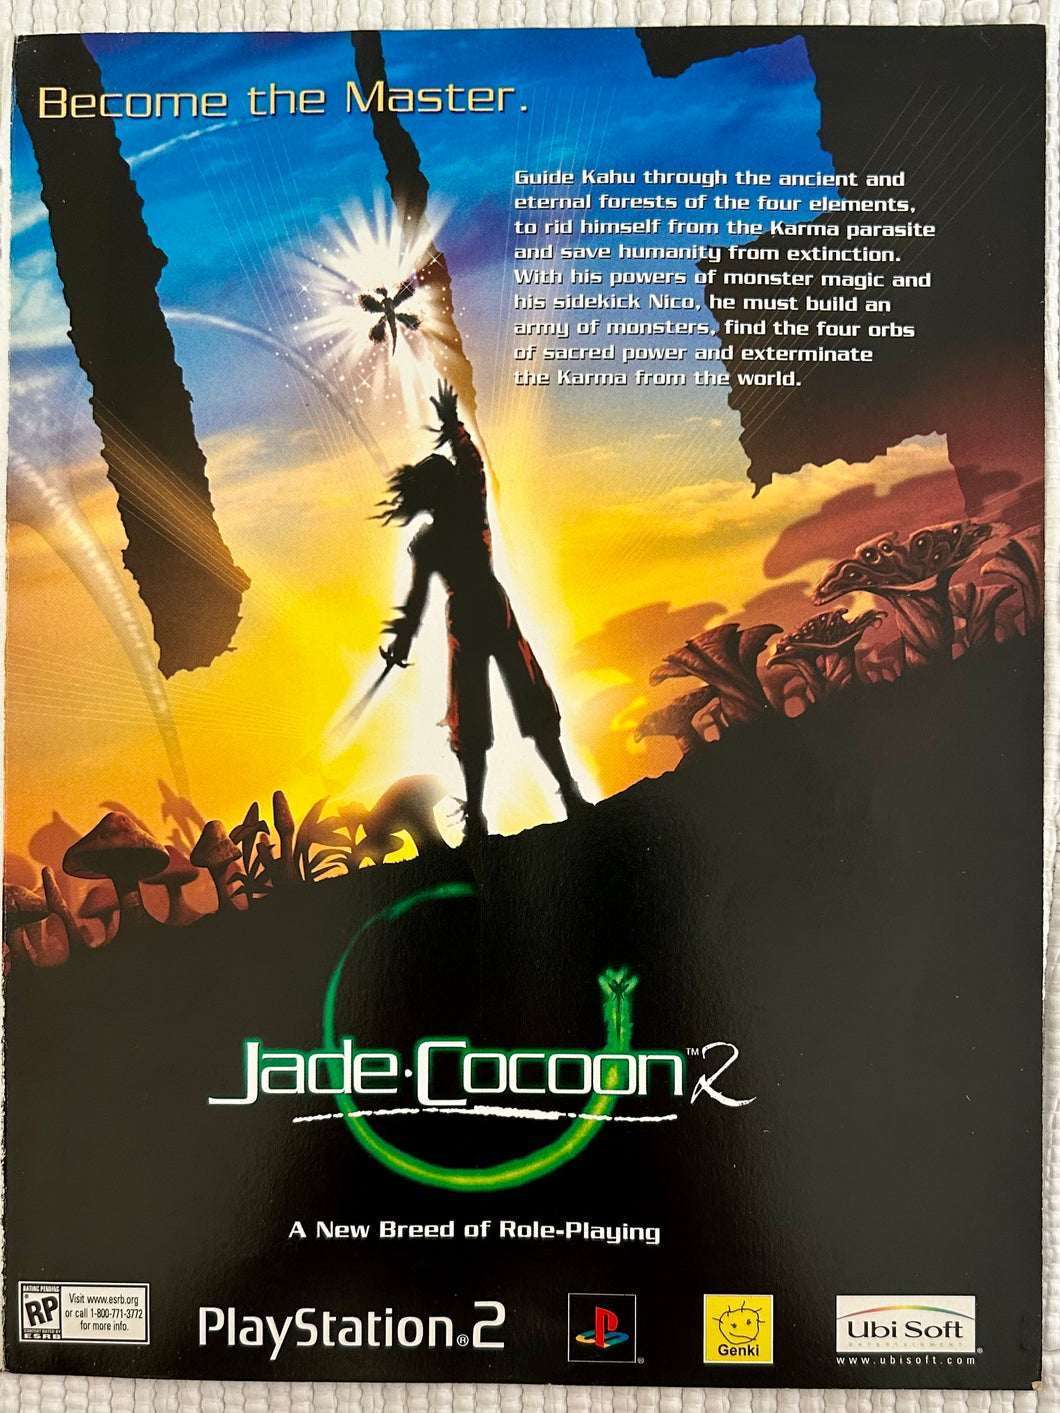 Jade Cocoon 2 - PS2 - Original Vintage Advertisement - Print Ads - Laminated A4 Poster